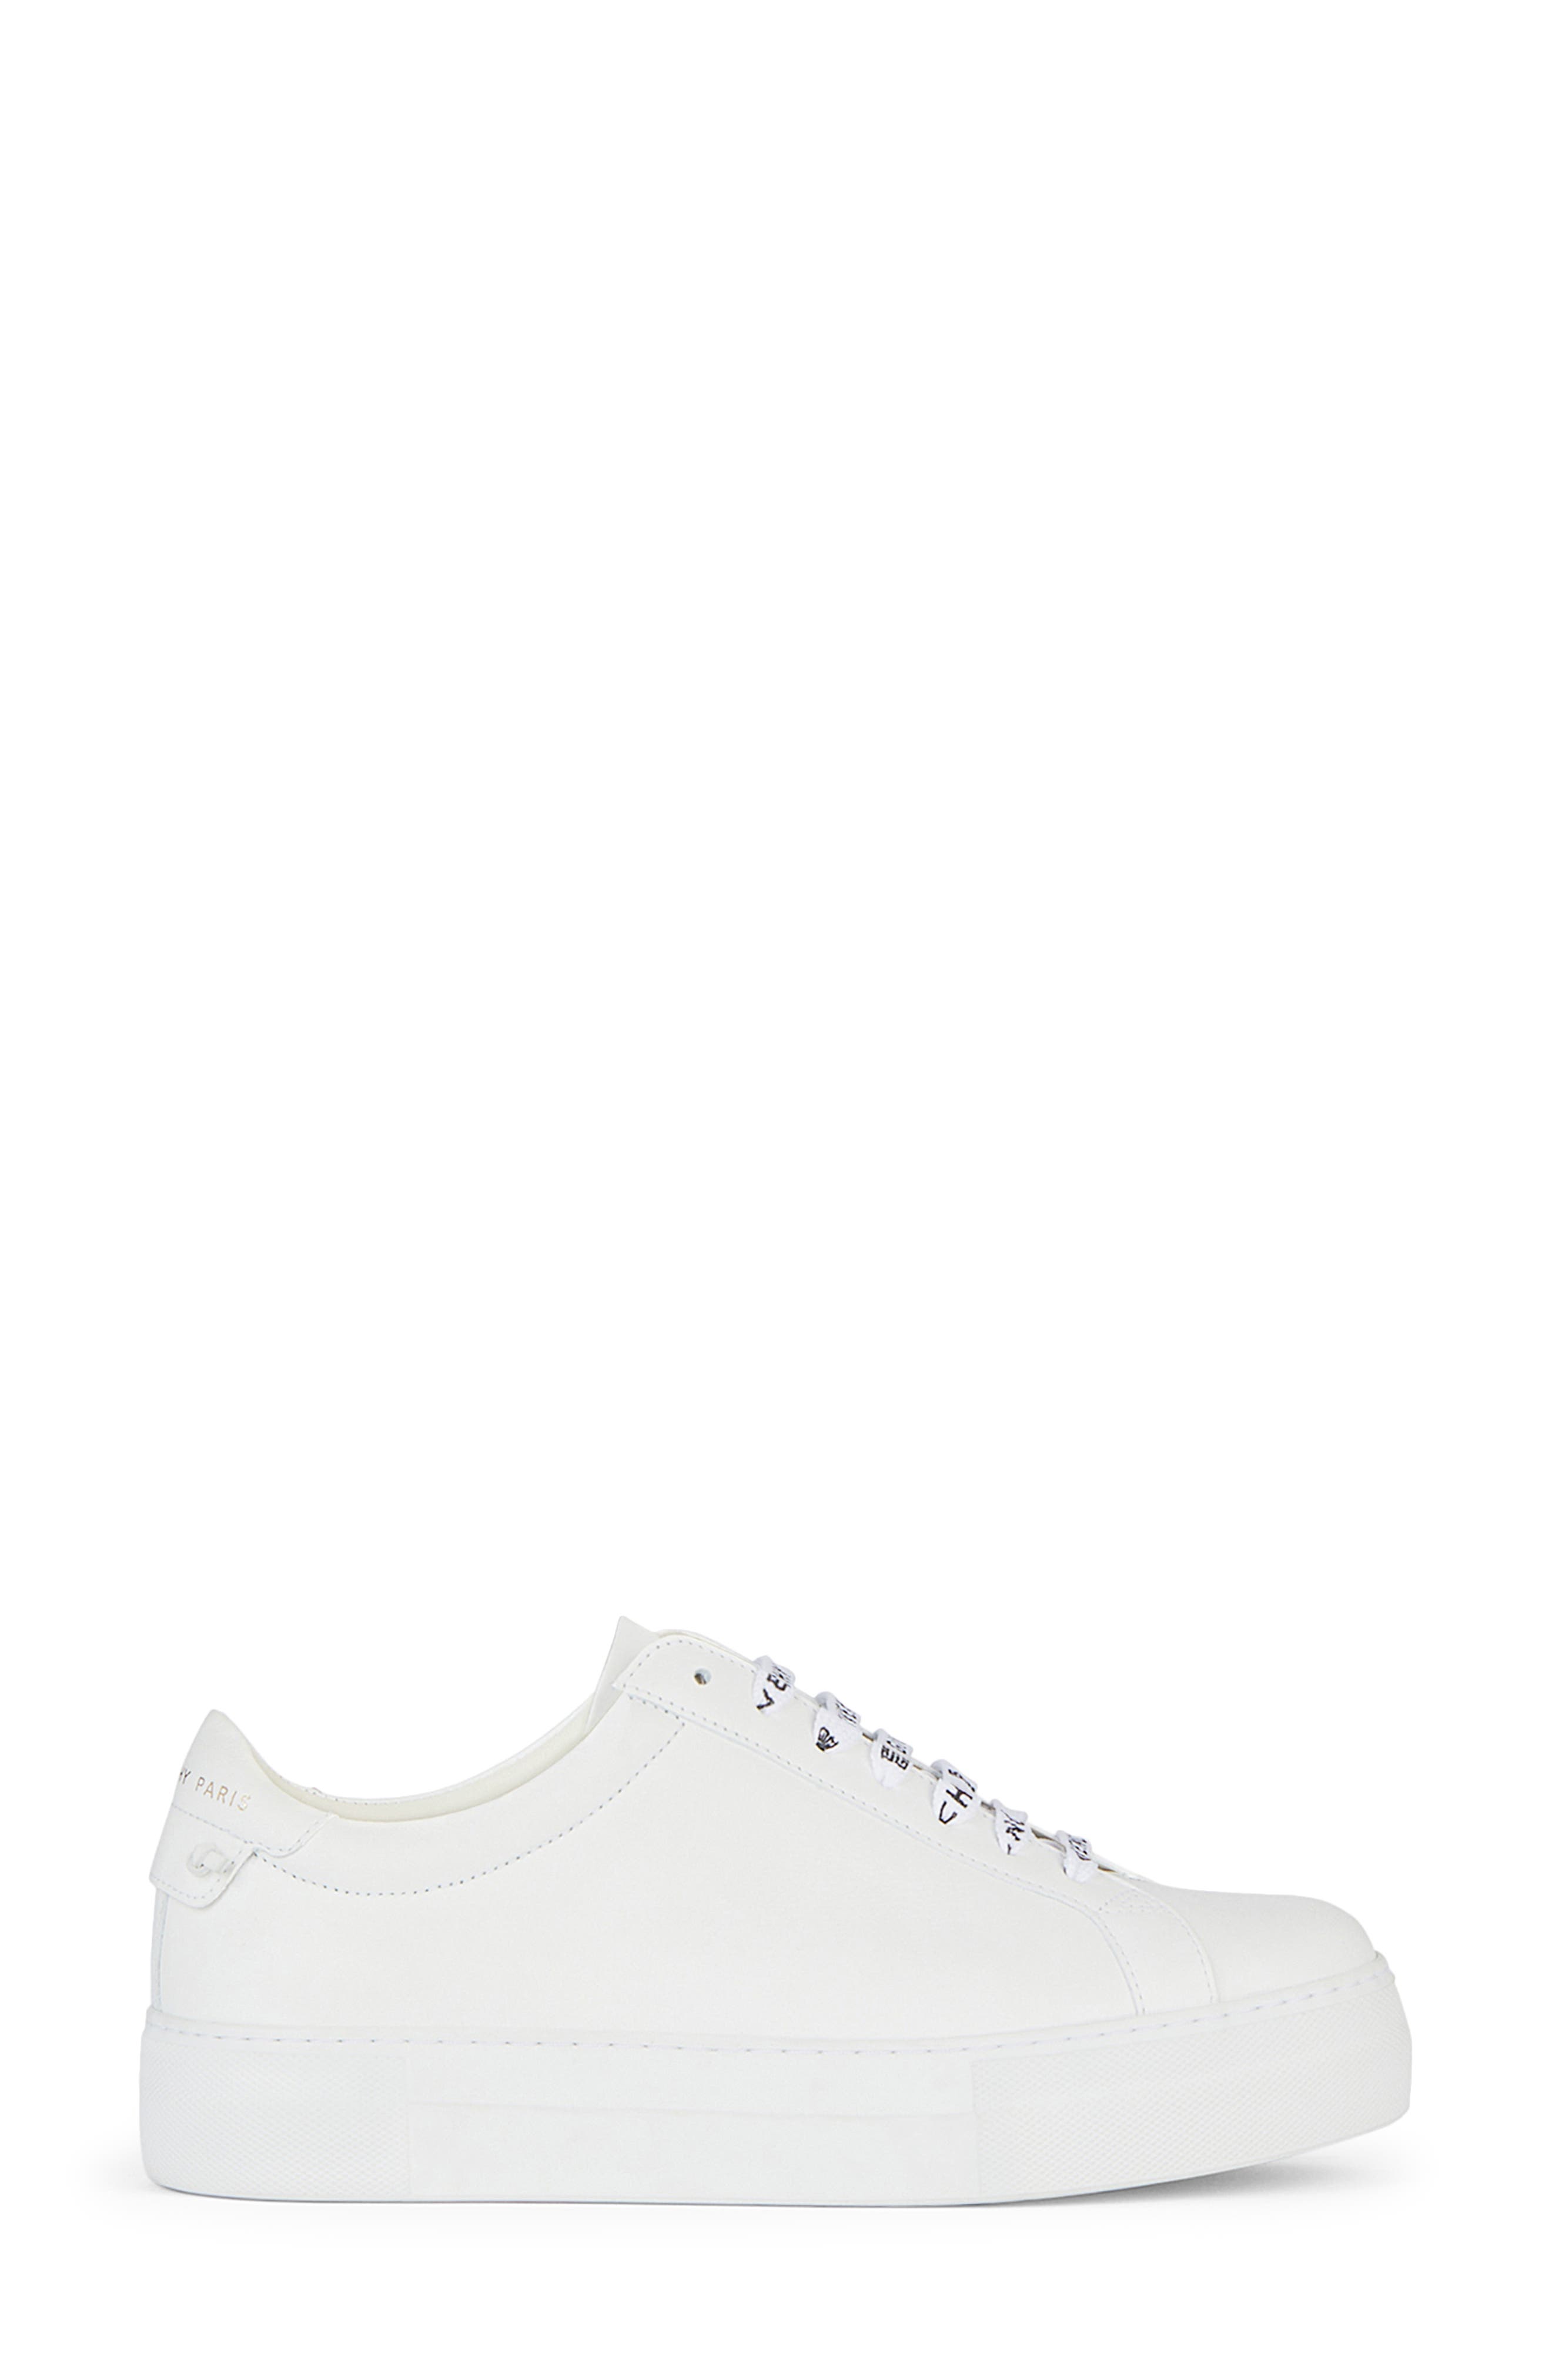 givenchy sport shoes